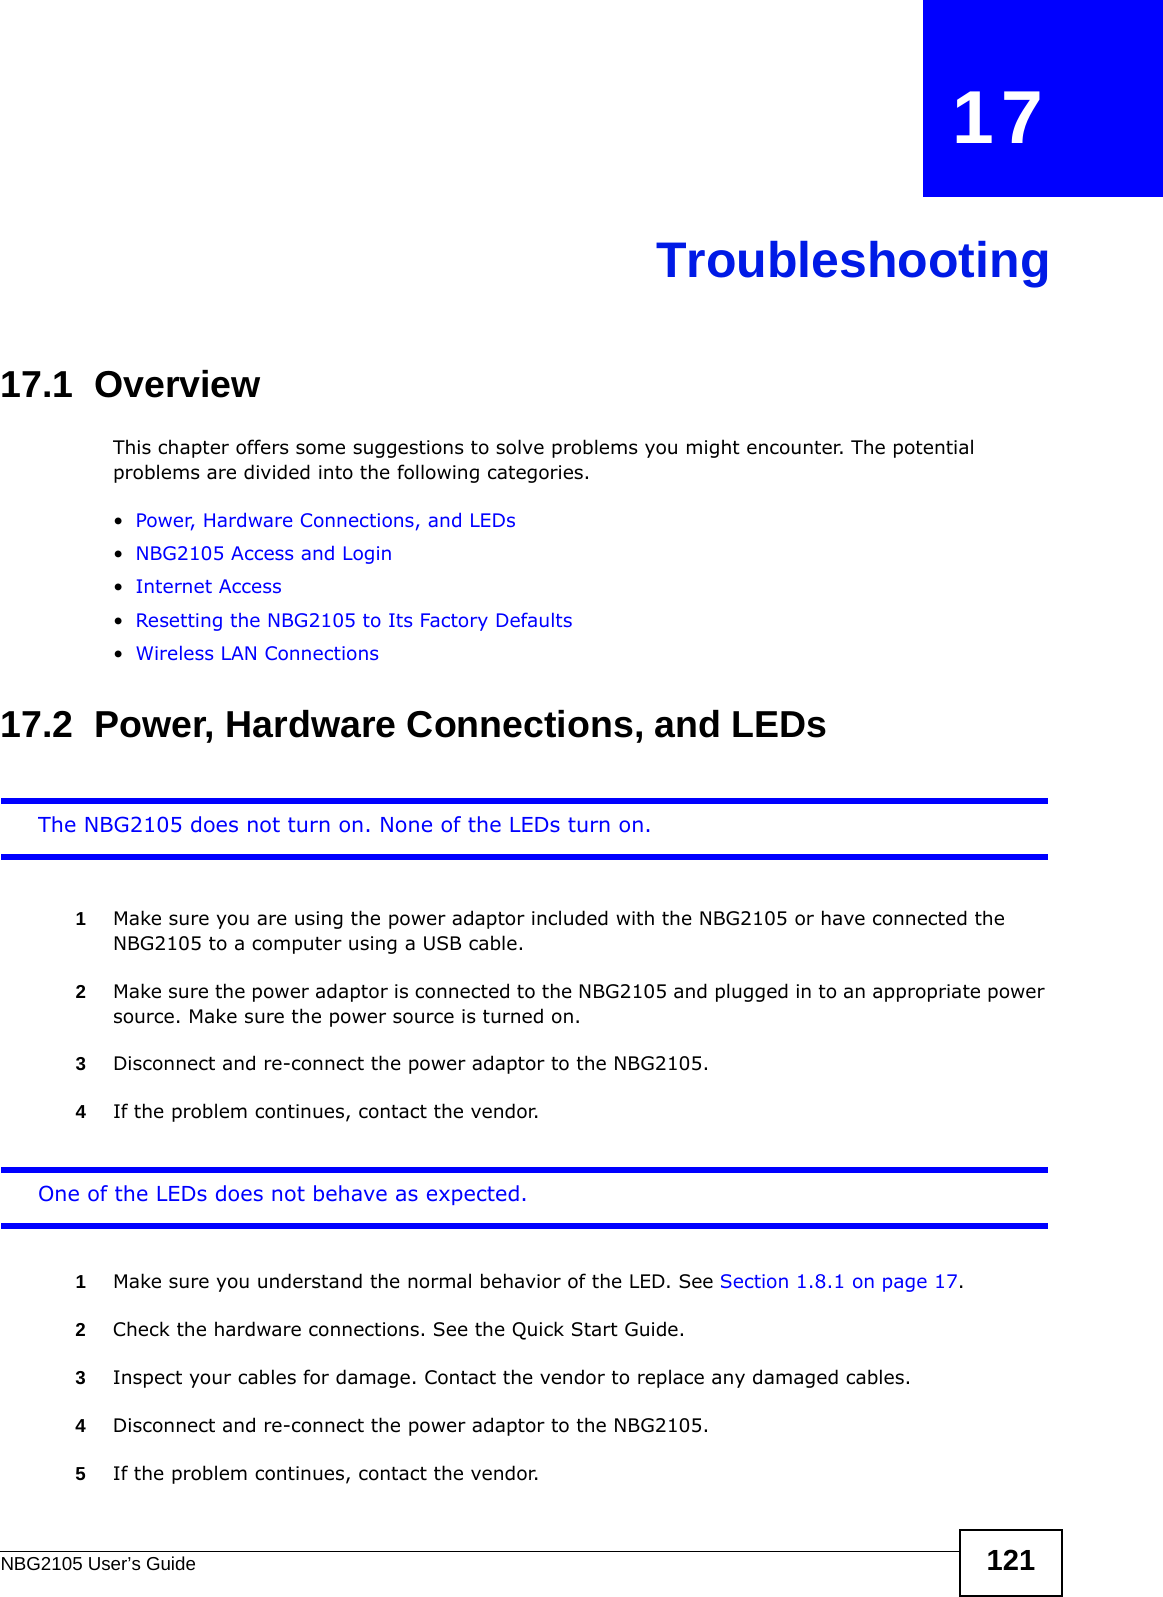 NBG2105 User’s Guide 121CHAPTER   17Troubleshooting17.1  OverviewThis chapter offers some suggestions to solve problems you might encounter. The potential problems are divided into the following categories. •Power, Hardware Connections, and LEDs•NBG2105 Access and Login•Internet Access•Resetting the NBG2105 to Its Factory Defaults•Wireless LAN Connections17.2  Power, Hardware Connections, and LEDsThe NBG2105 does not turn on. None of the LEDs turn on.1Make sure you are using the power adaptor included with the NBG2105 or have connected the NBG2105 to a computer using a USB cable.2Make sure the power adaptor is connected to the NBG2105 and plugged in to an appropriate power source. Make sure the power source is turned on.3Disconnect and re-connect the power adaptor to the NBG2105.4If the problem continues, contact the vendor.One of the LEDs does not behave as expected.1Make sure you understand the normal behavior of the LED. See Section 1.8.1 on page 17.2Check the hardware connections. See the Quick Start Guide. 3Inspect your cables for damage. Contact the vendor to replace any damaged cables.4Disconnect and re-connect the power adaptor to the NBG2105. 5If the problem continues, contact the vendor.